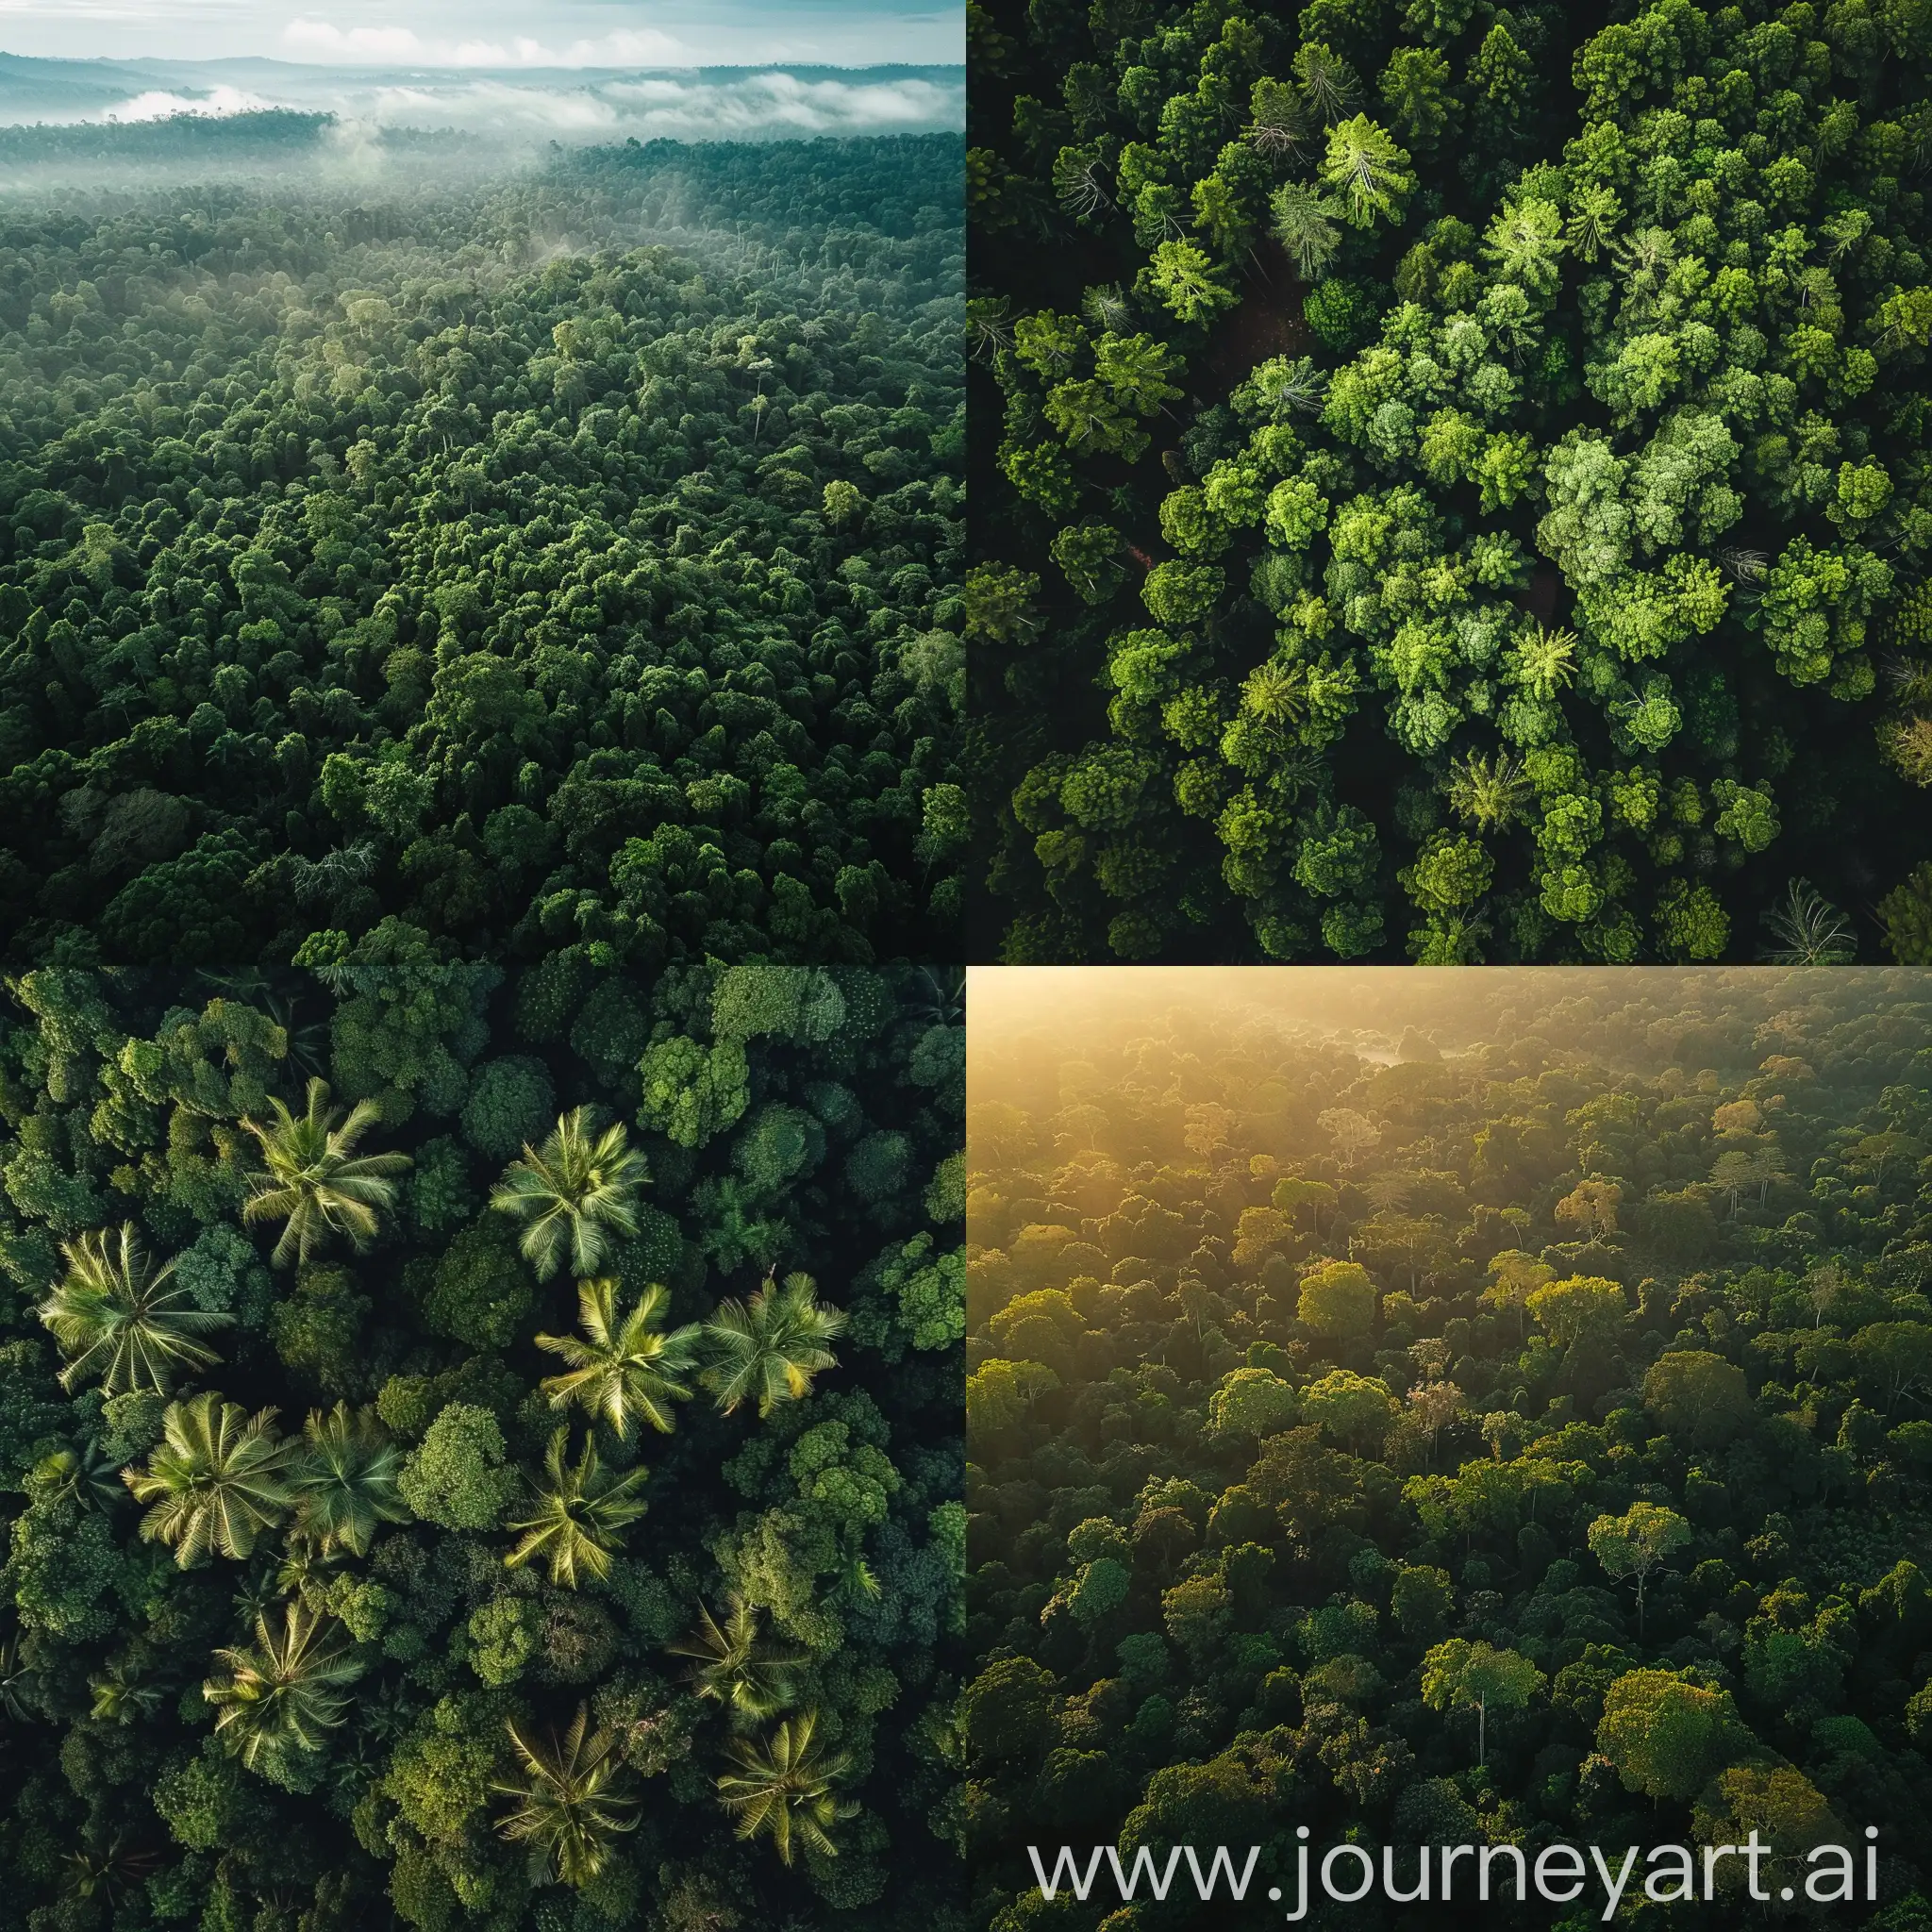 Spectacular-Aerial-View-of-Lush-Forest-Canopy